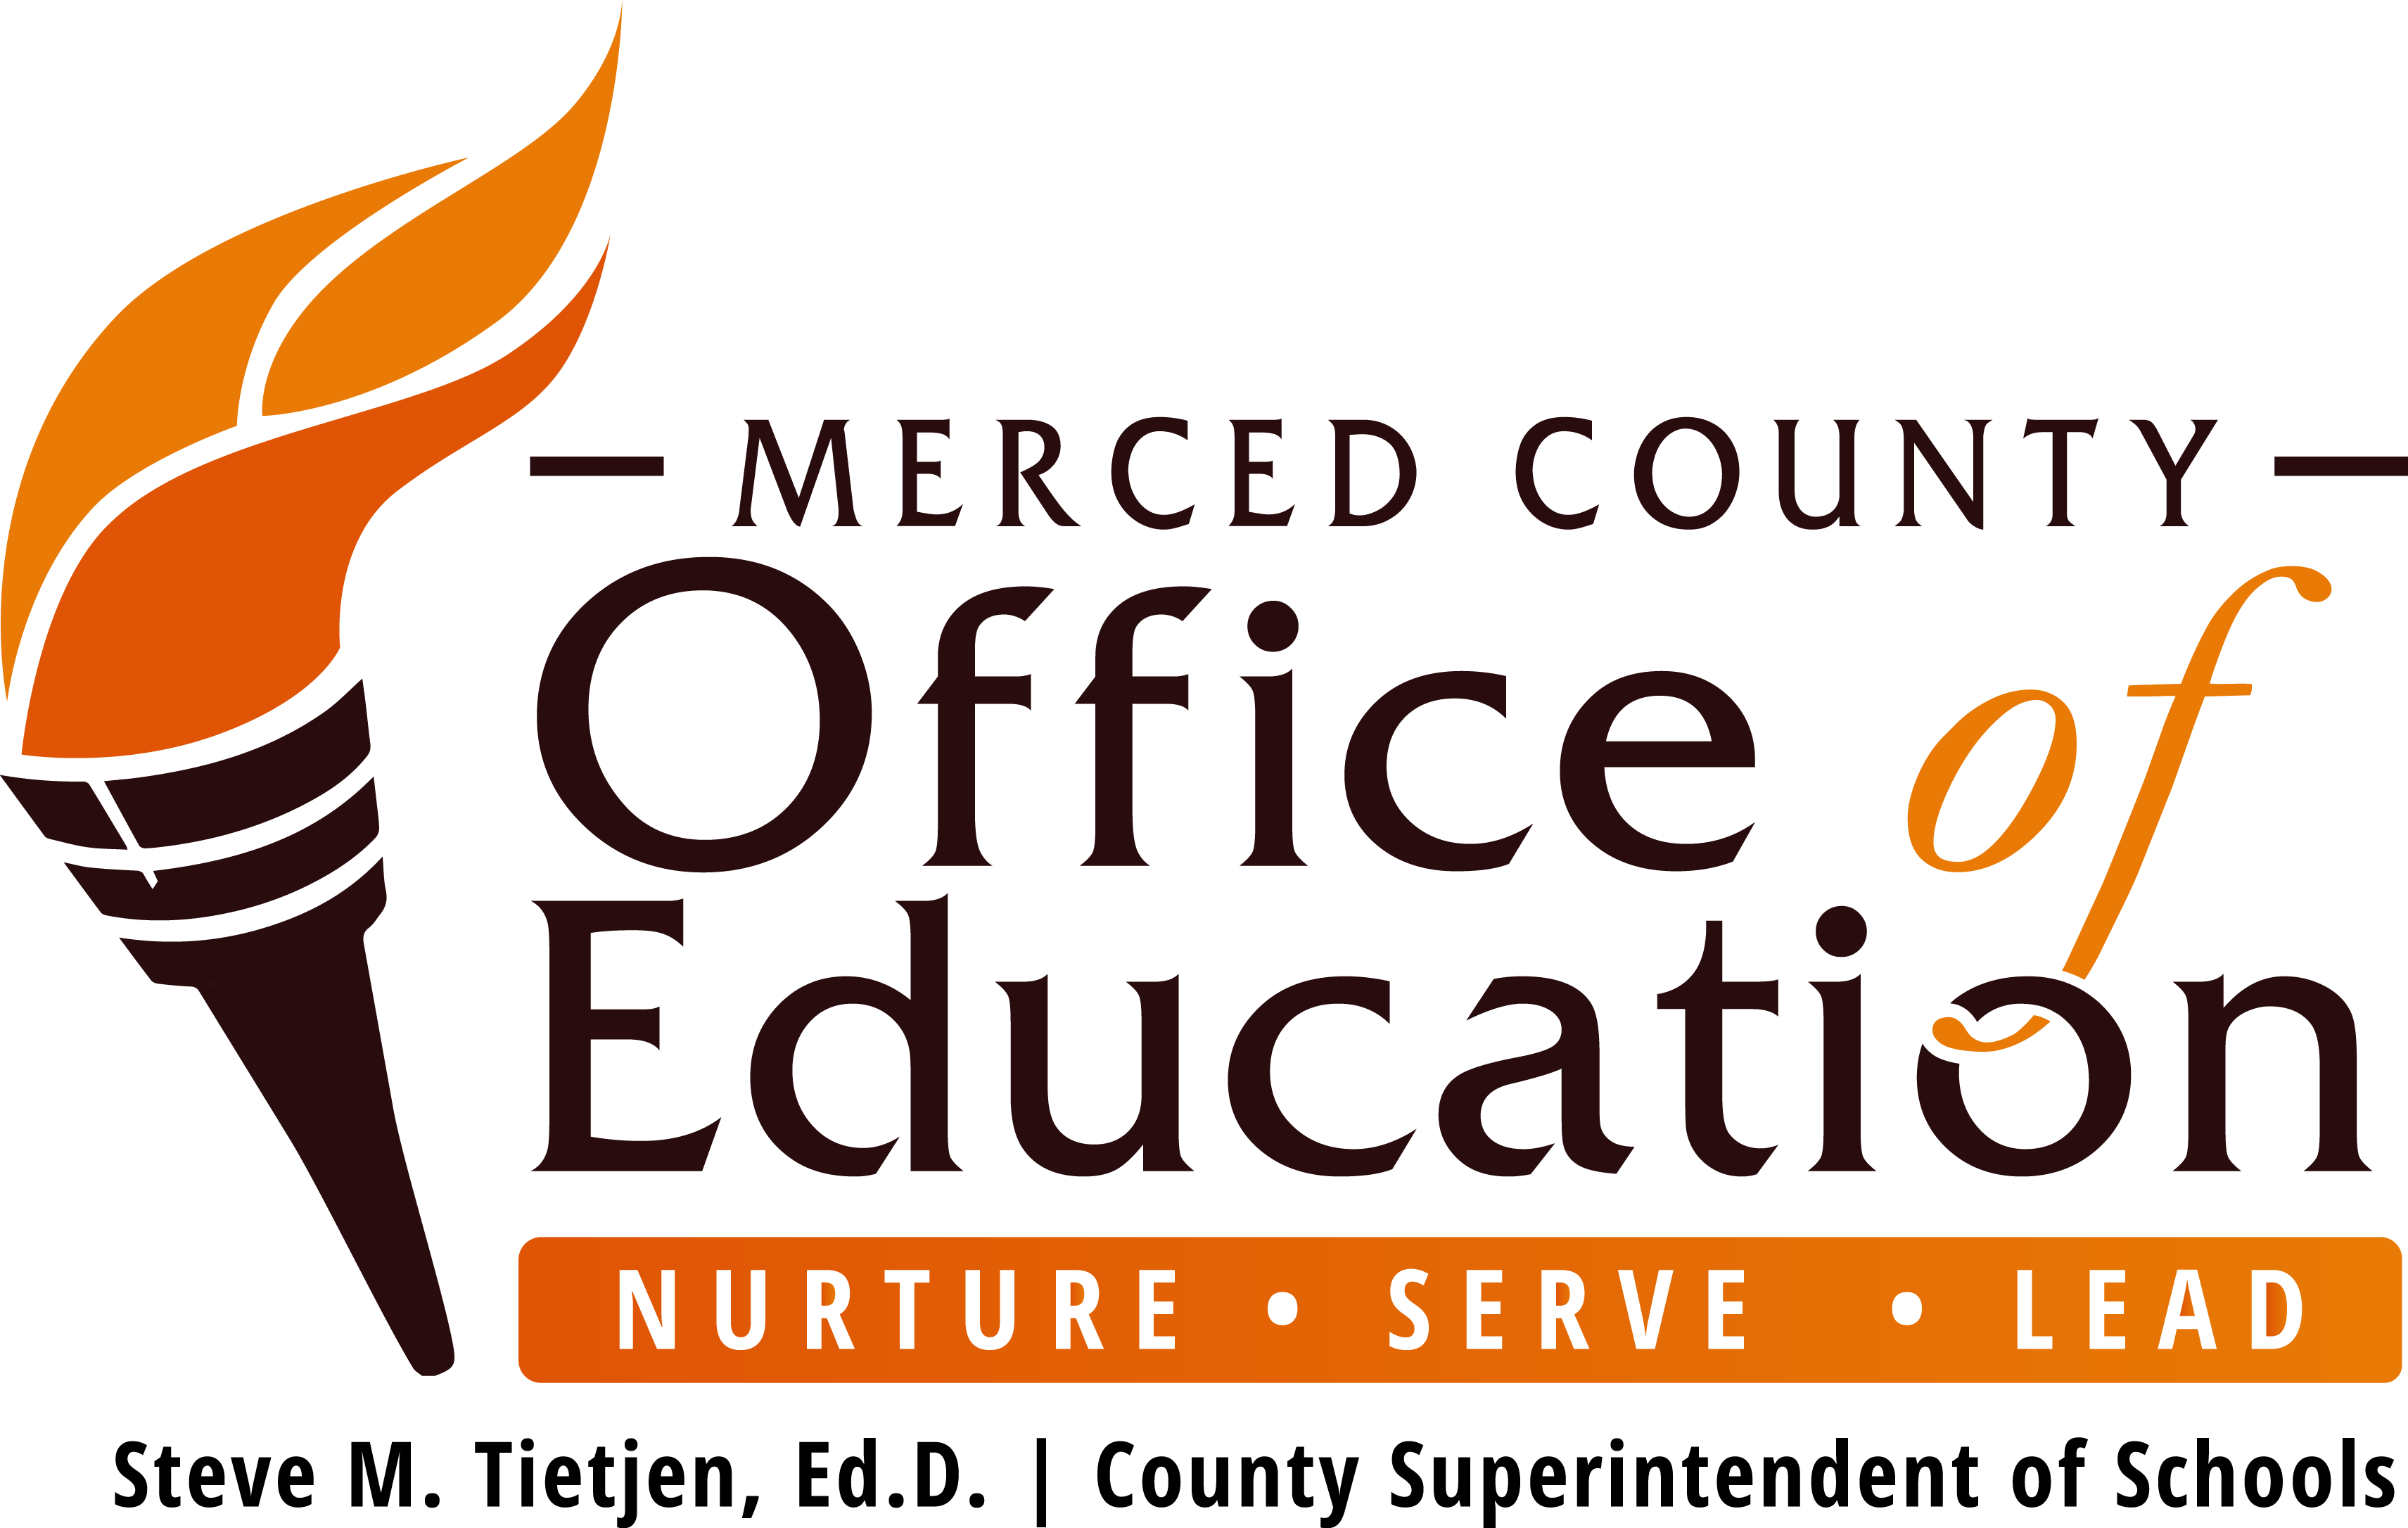 Merced County Office of Education - Merced County Office of Education VOD Player - organization logo